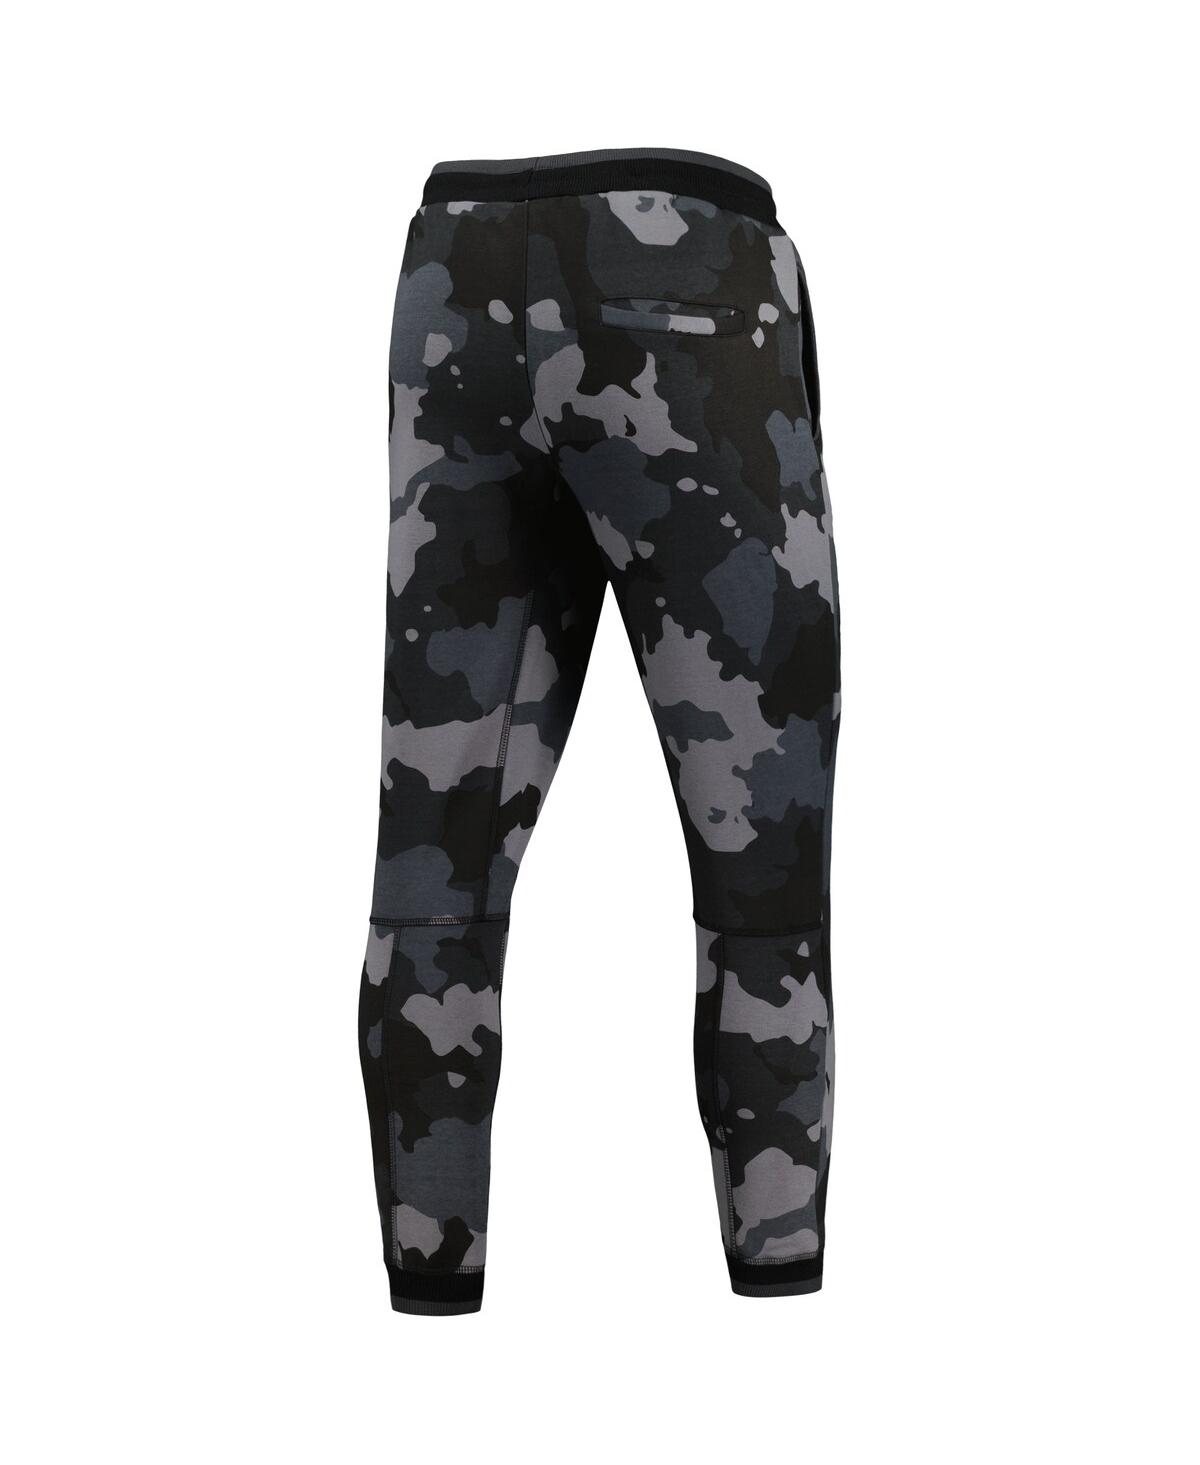 Shop The Wild Collective Men's And Women's  Black Pittsburgh Steelers Camo Jogger Pants